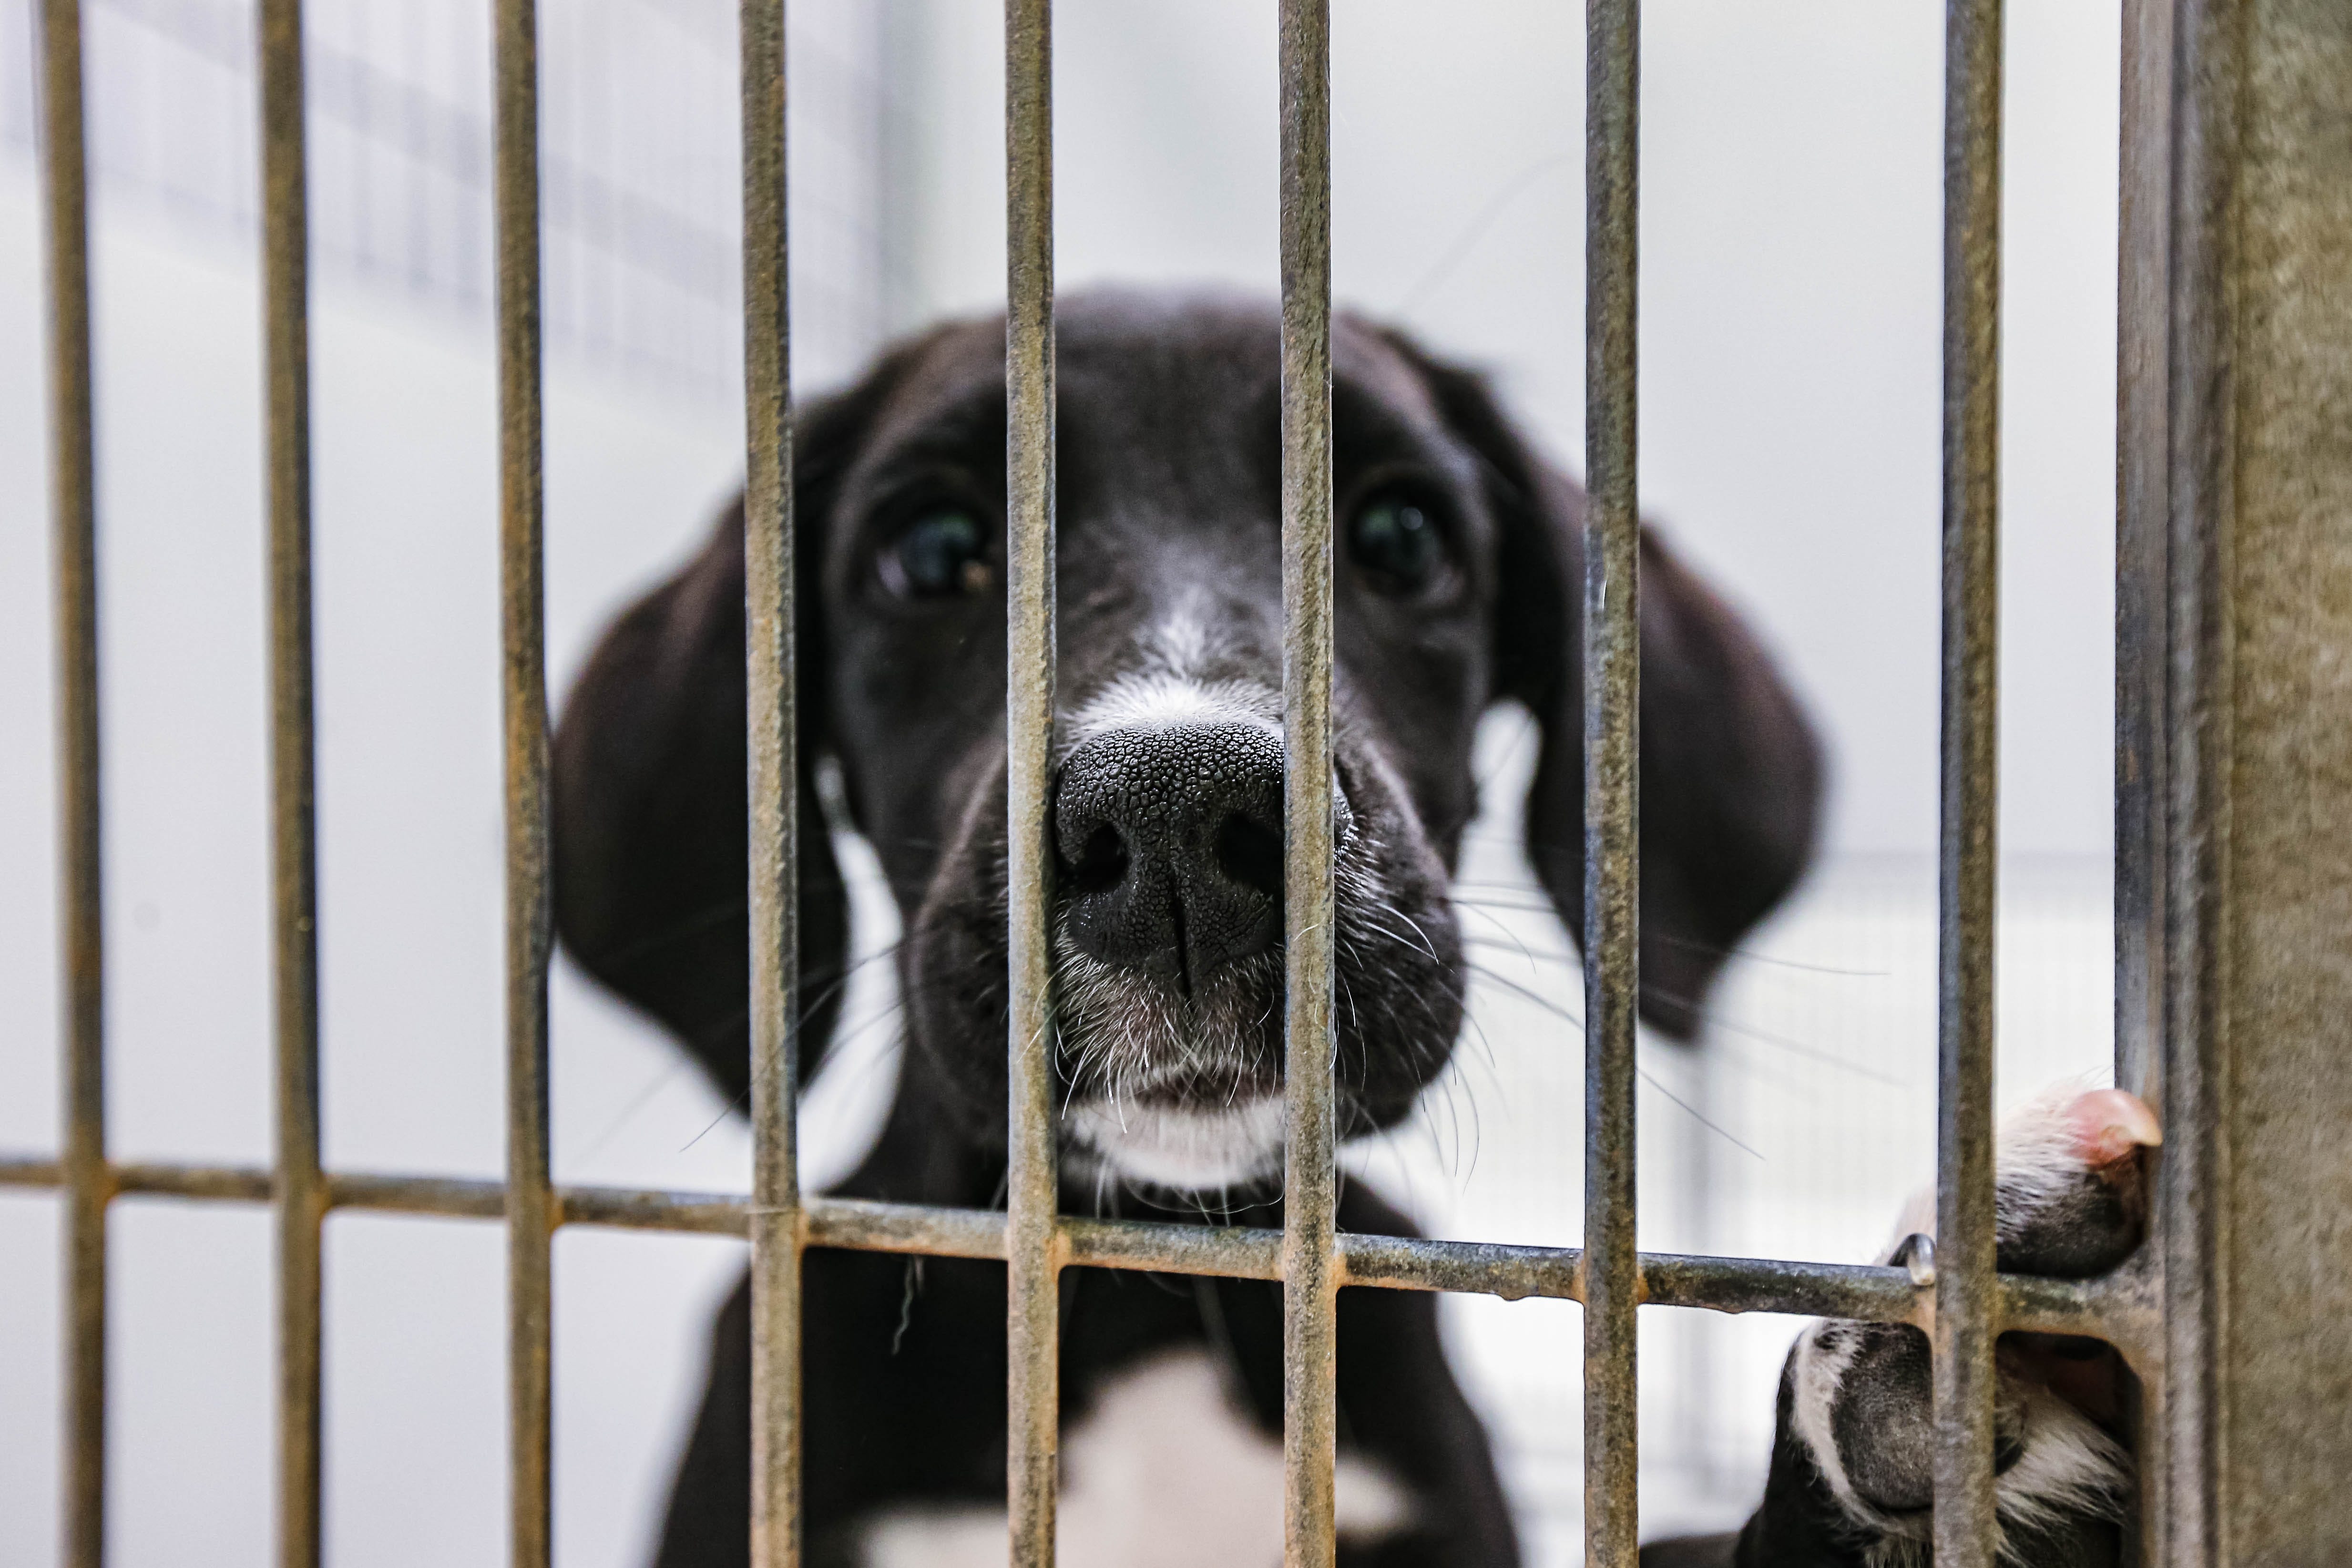 Oklahoma City animal shelters overcrowded during busy season